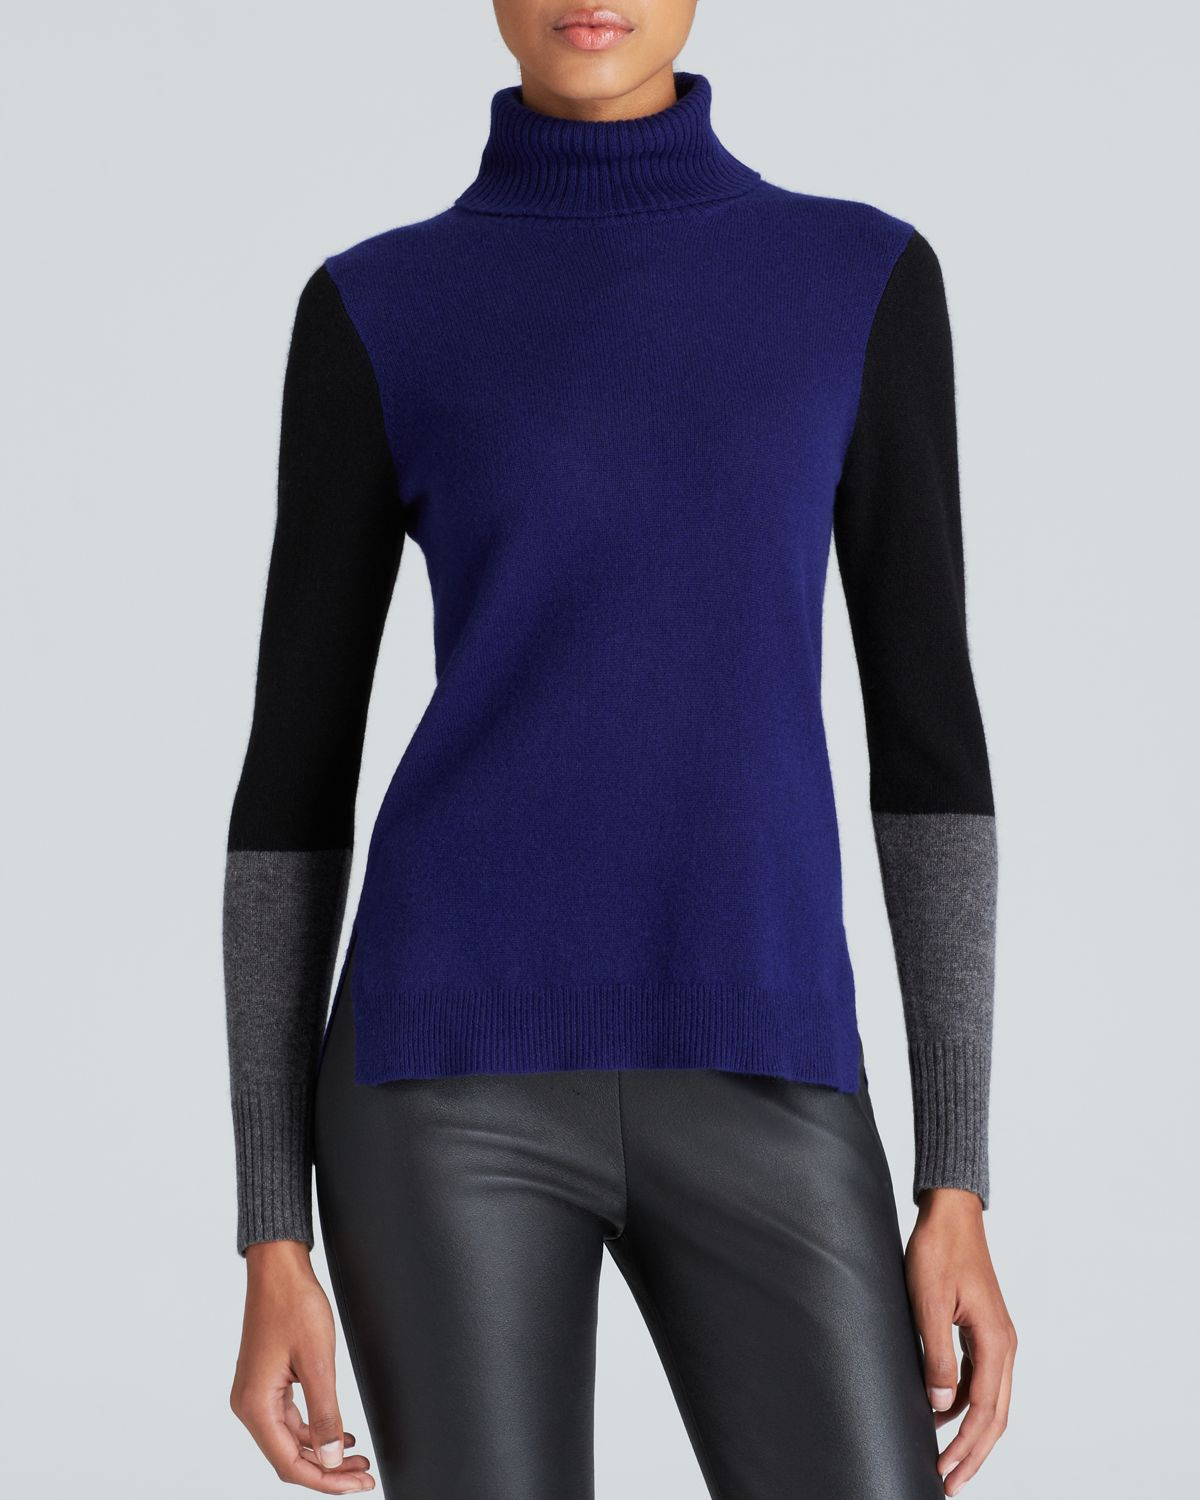 Lyst - C By Bloomingdale'S Color Block Cashmere Turtleneck Sweater in Black